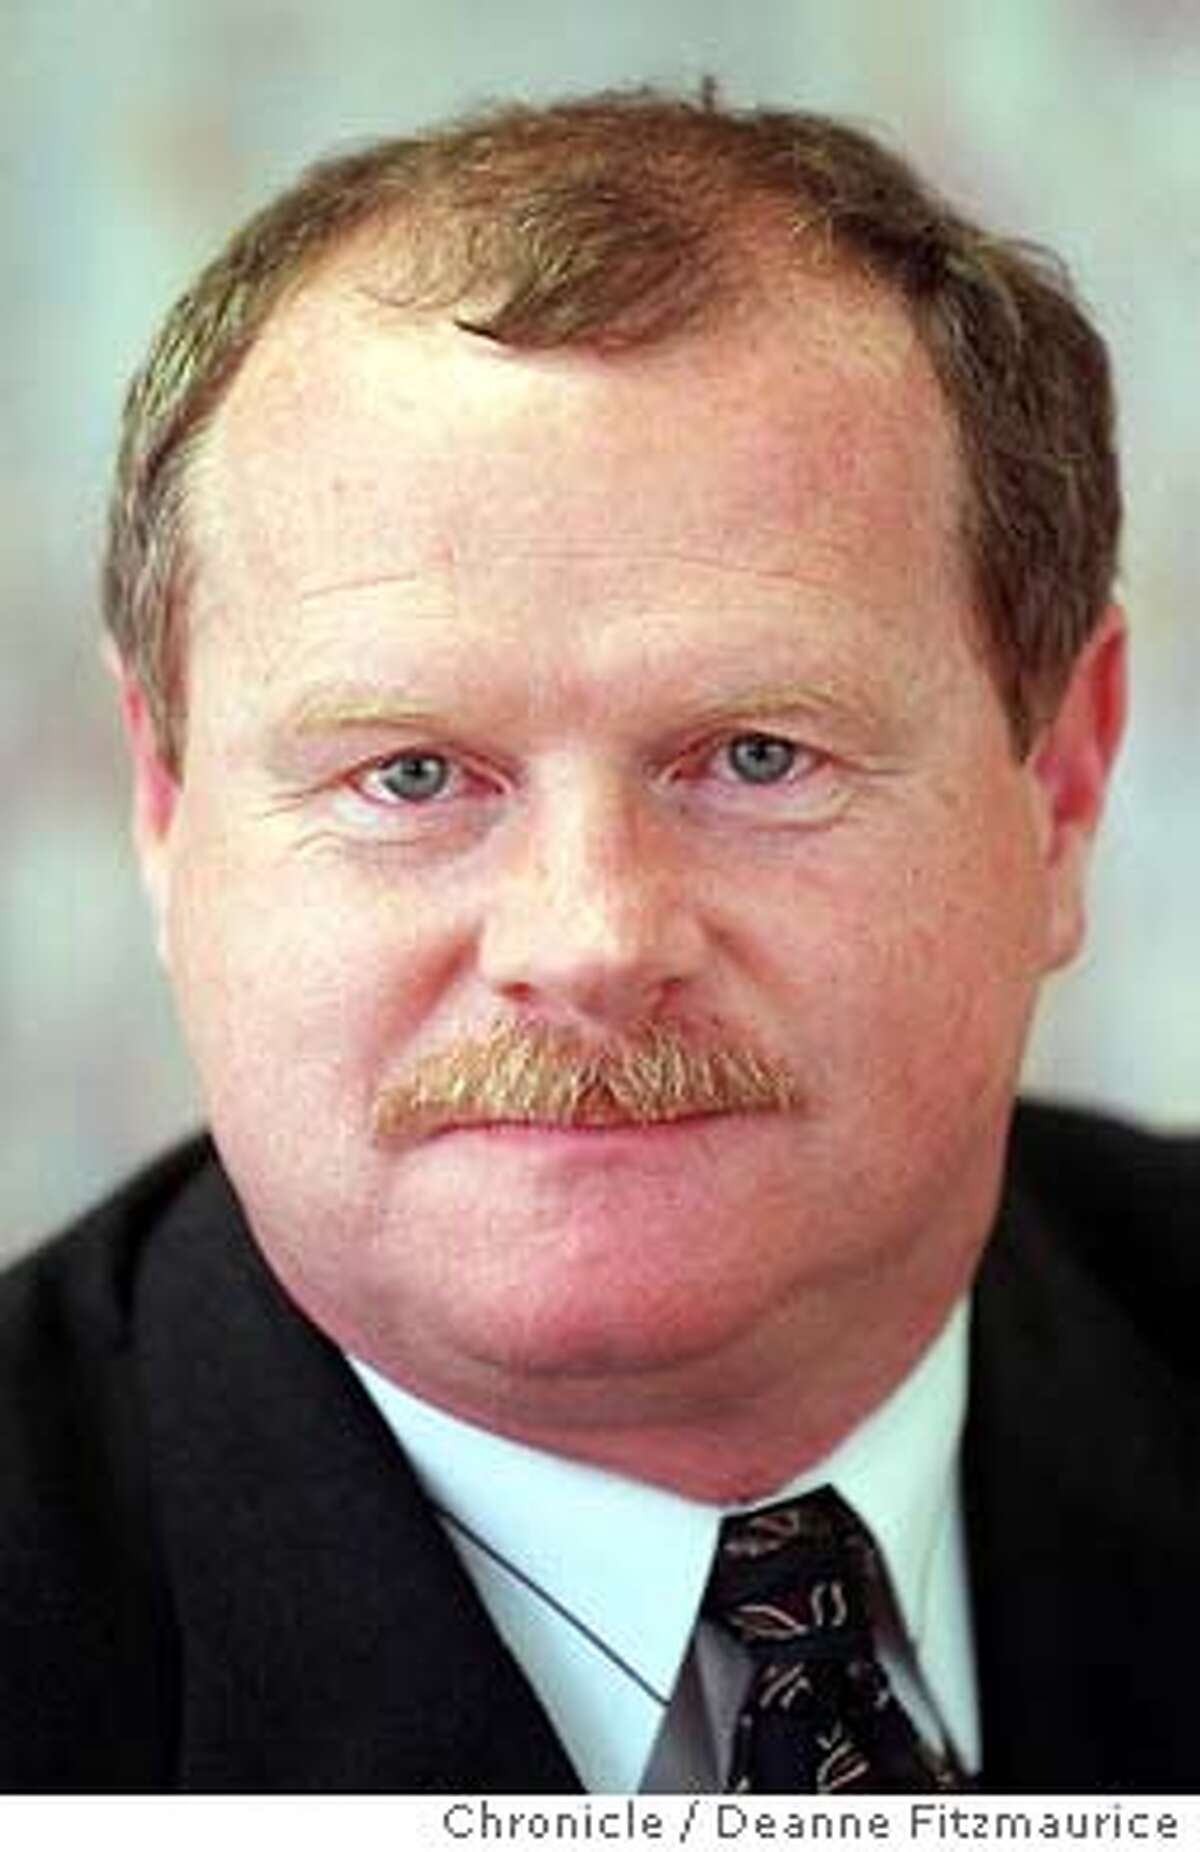 HENNESSEY-SF SHERIFF MICHAEL HENNESSEY PHOTO BY DEANNE FITZMAURICE/ THE CHRONICLE. ALSO RAN: 05/26/98, 4/2/99, 06/03/1999, 06/04/1999, 10/26/1999, 11/2/99, 05/02/2001, 03/06/02 also ran 7/18/03